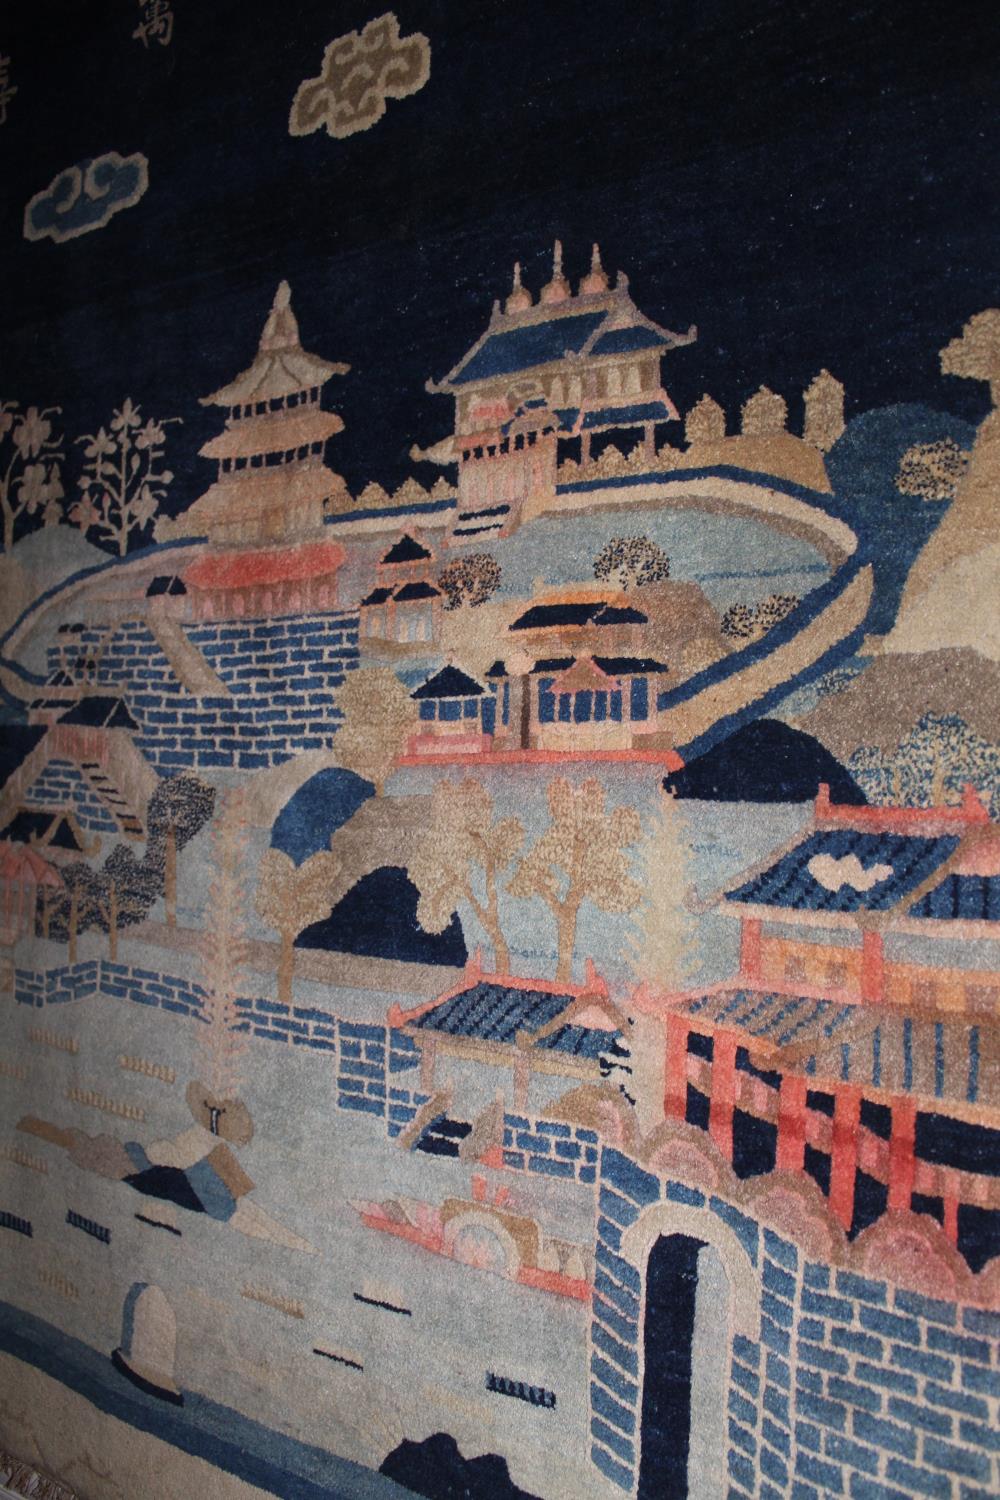 Chinese rug woven with a landscape design in shades of blue, pink and beige beneath a row of seven